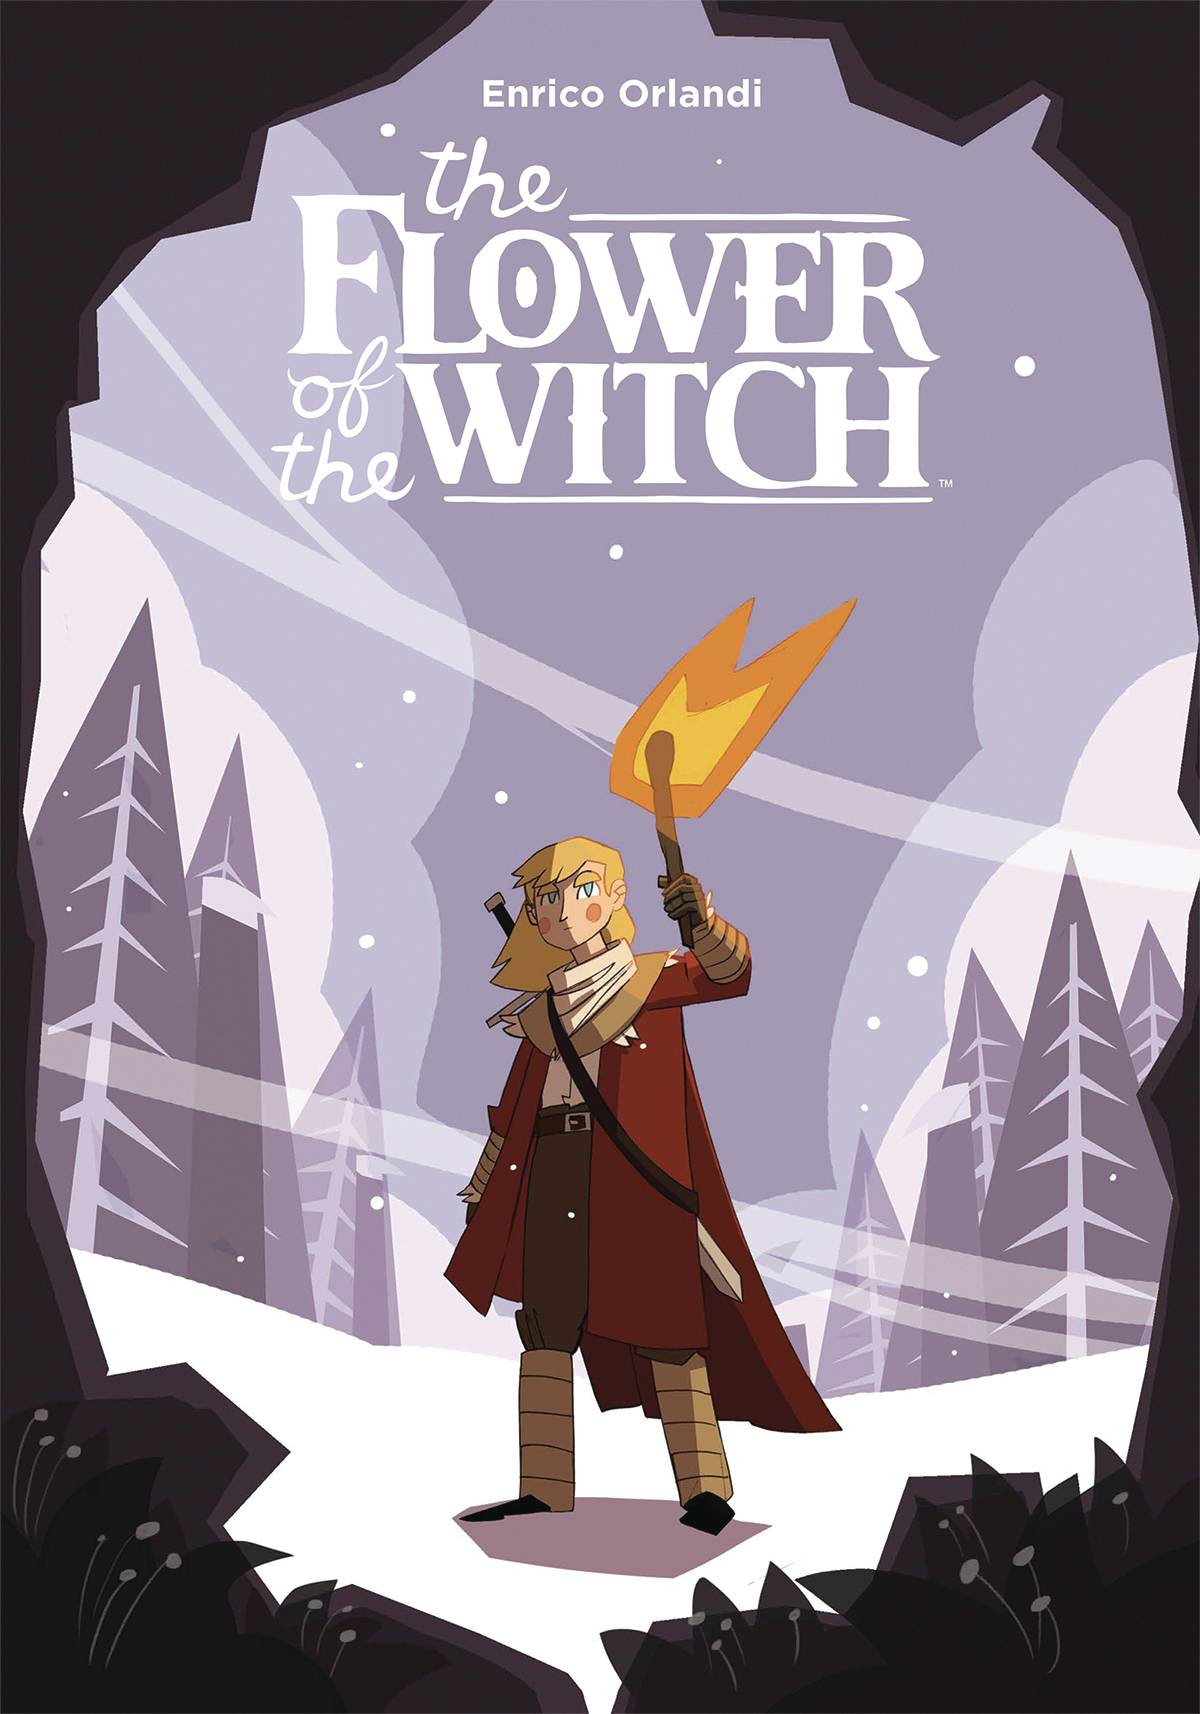 A person with shoulderlength blond hair stands at the mouth of a dark cave, wearing a heavy red coat and with a sword strapped to their back. They are holding a burning torch aloft. The scenery around them is full of trees, and snow is falling gently.